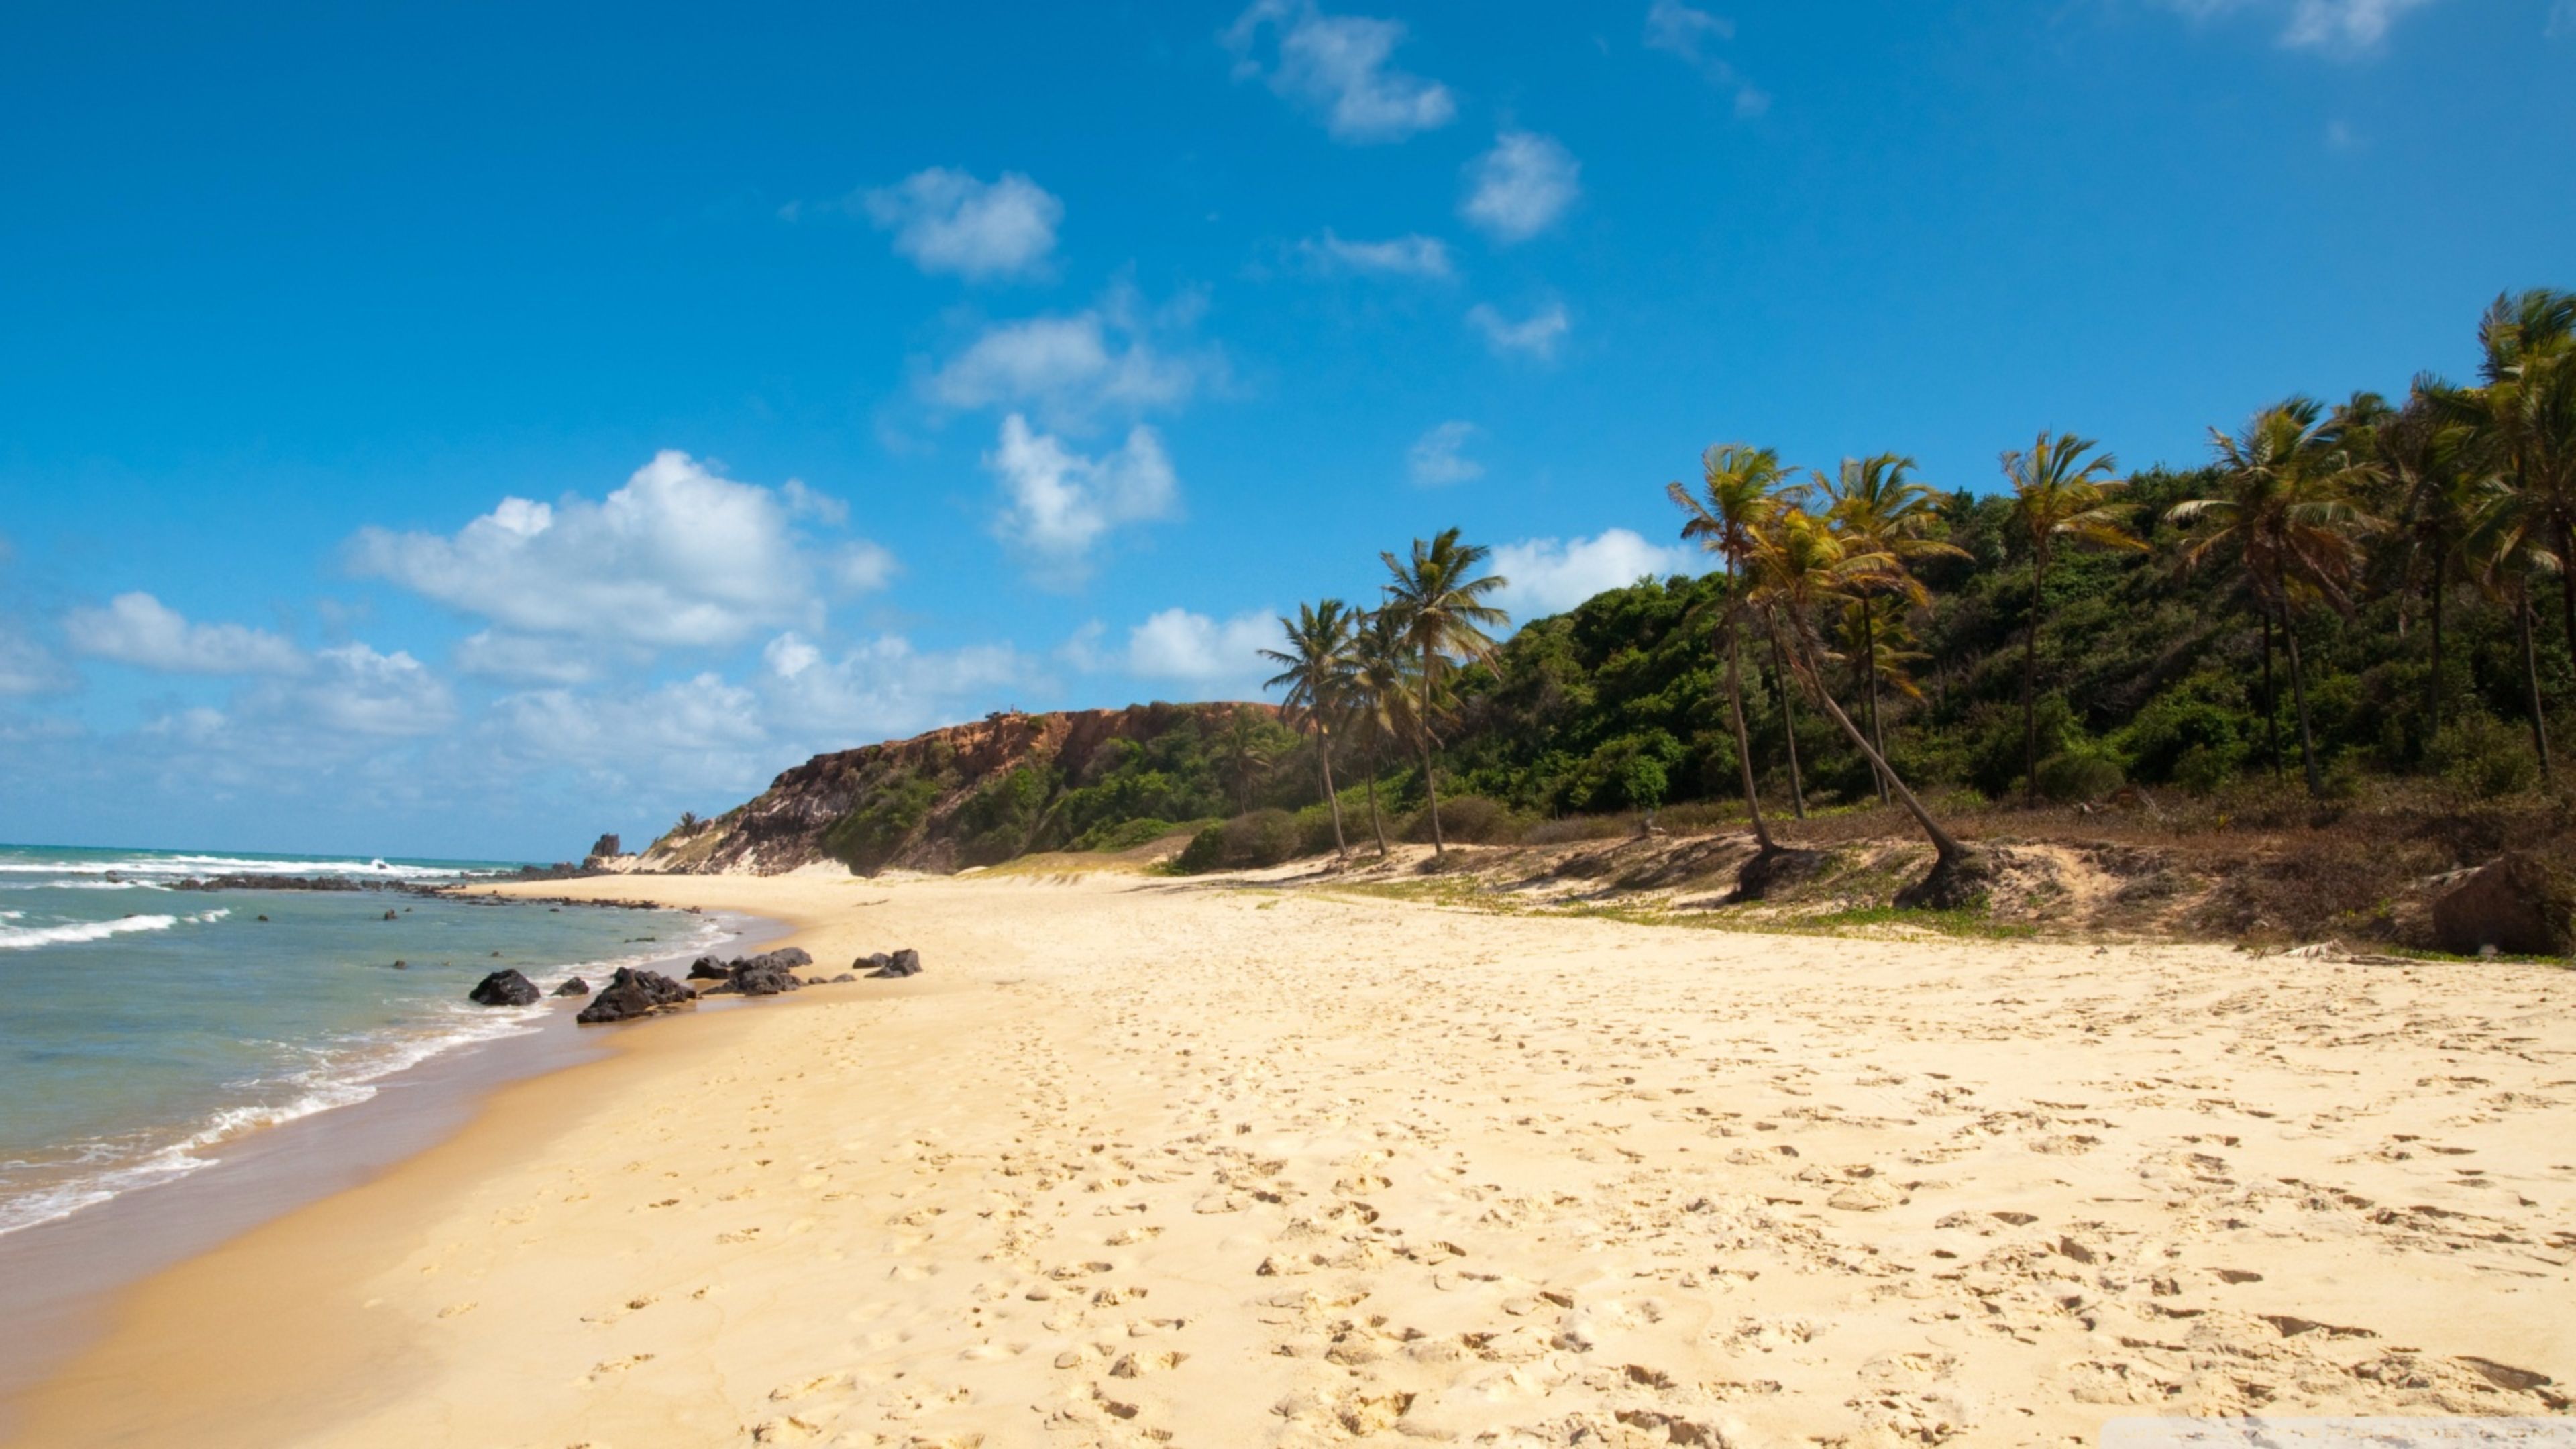 tropical beach seashore pictures free download